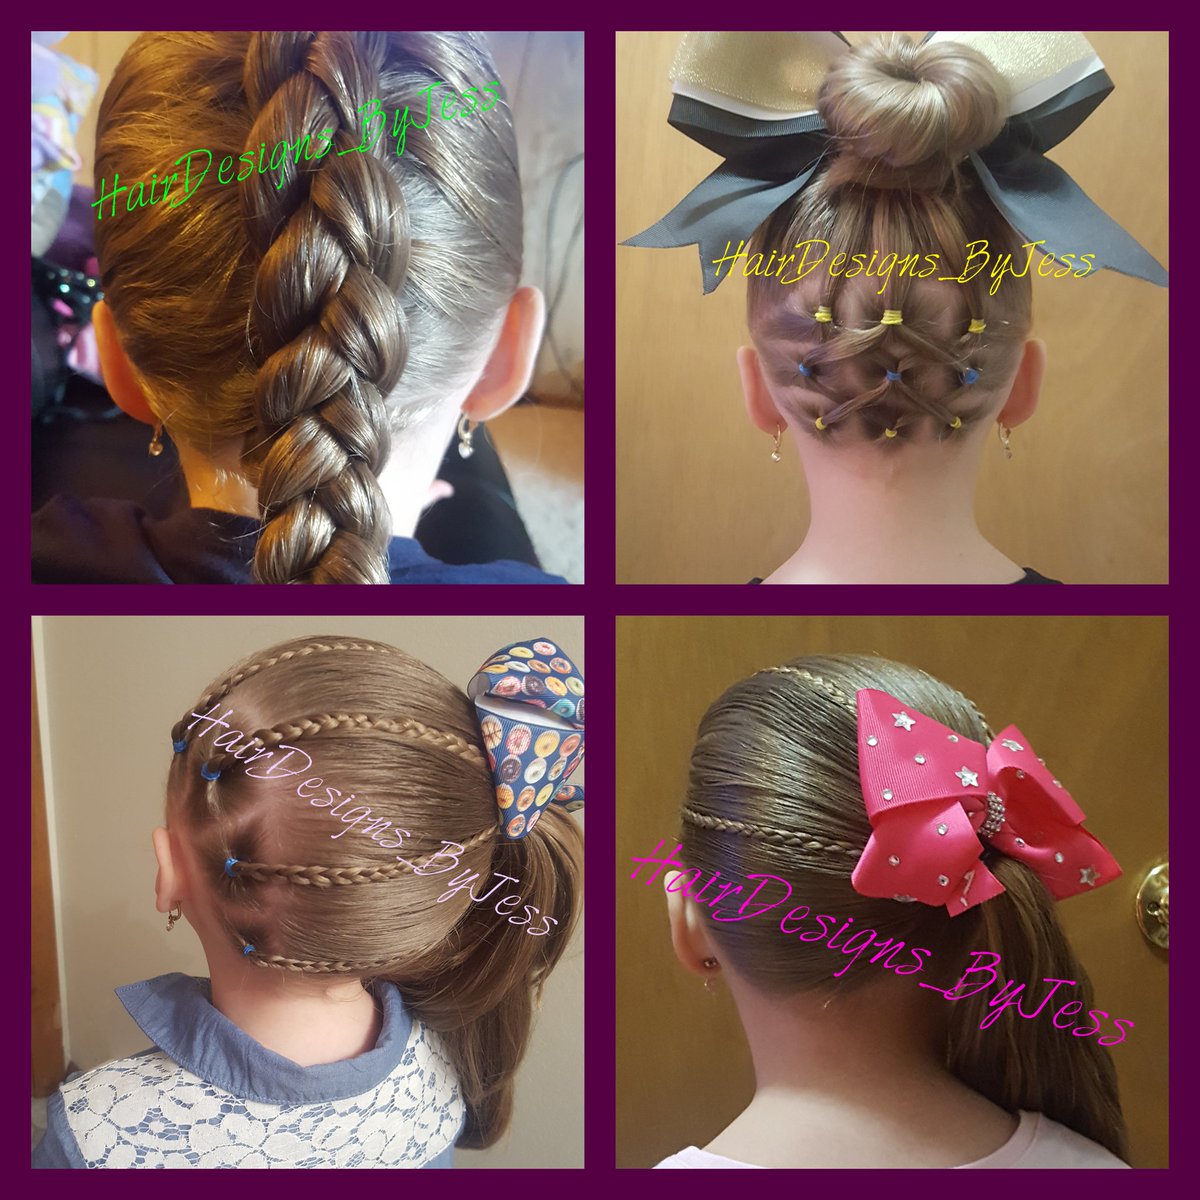 Come check out my Instagram to see the latest easy little girl styles I've created. They're perfect for School Day mornings. Instagram name HairDesigns_ByJess
#HairByMe #MomLife #GirlMom #littlegirlhairstyles #toddlerhairstyles #easyhairstyles #SchoolHair #CuteGirlsHairstyles